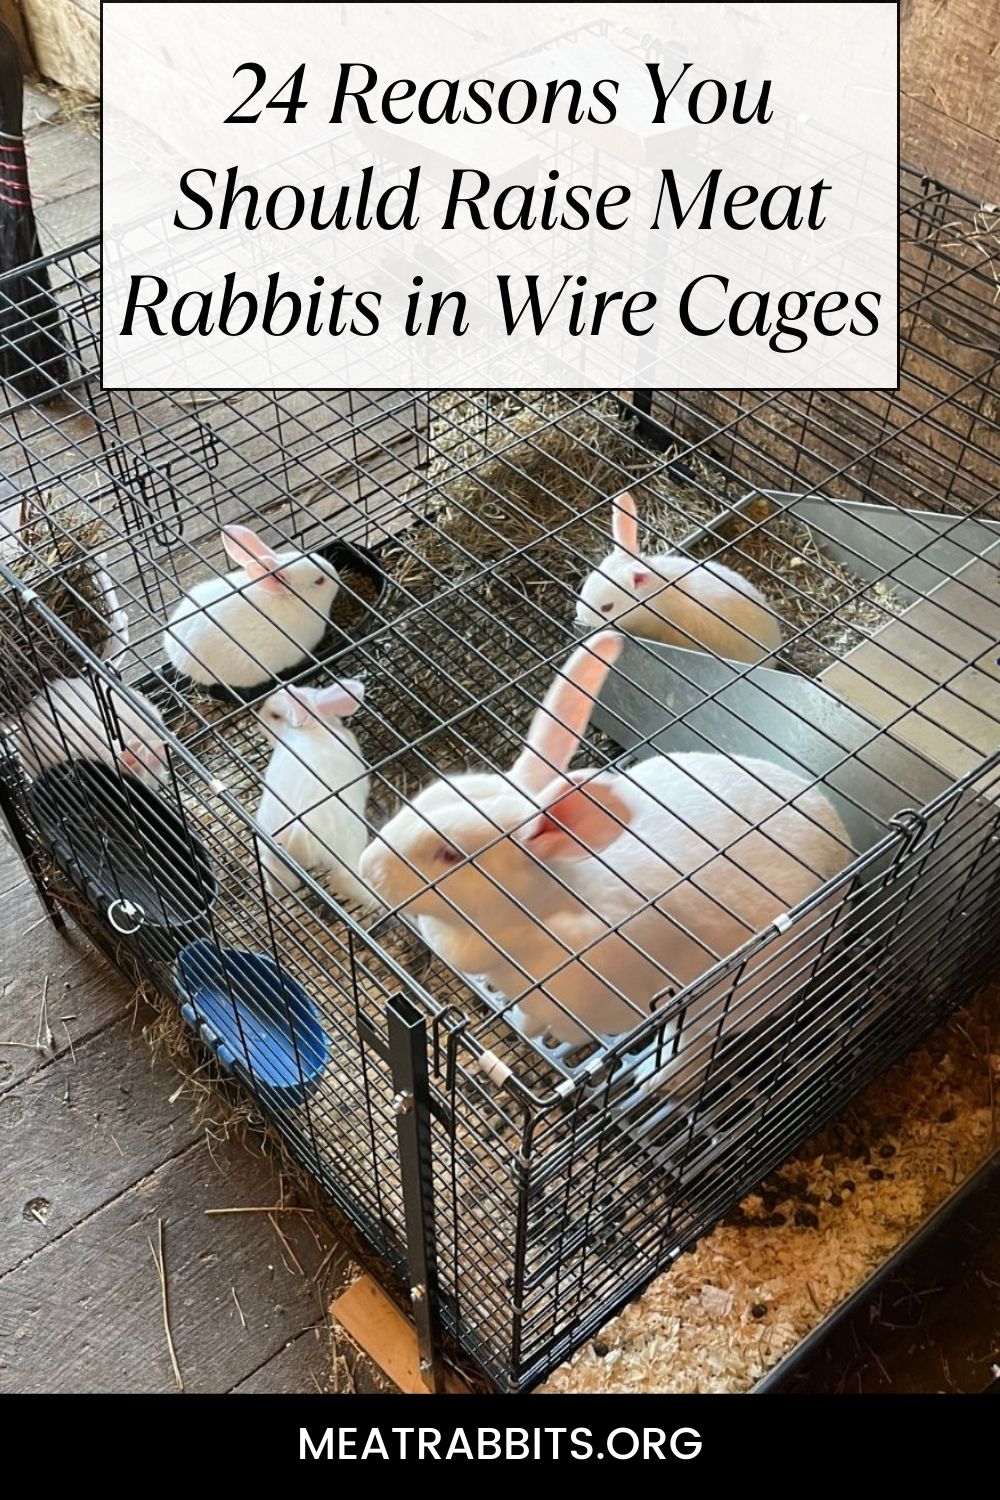 24 Reasons You Should Raise Meat Rabbits in Wire Cages pinterest image.